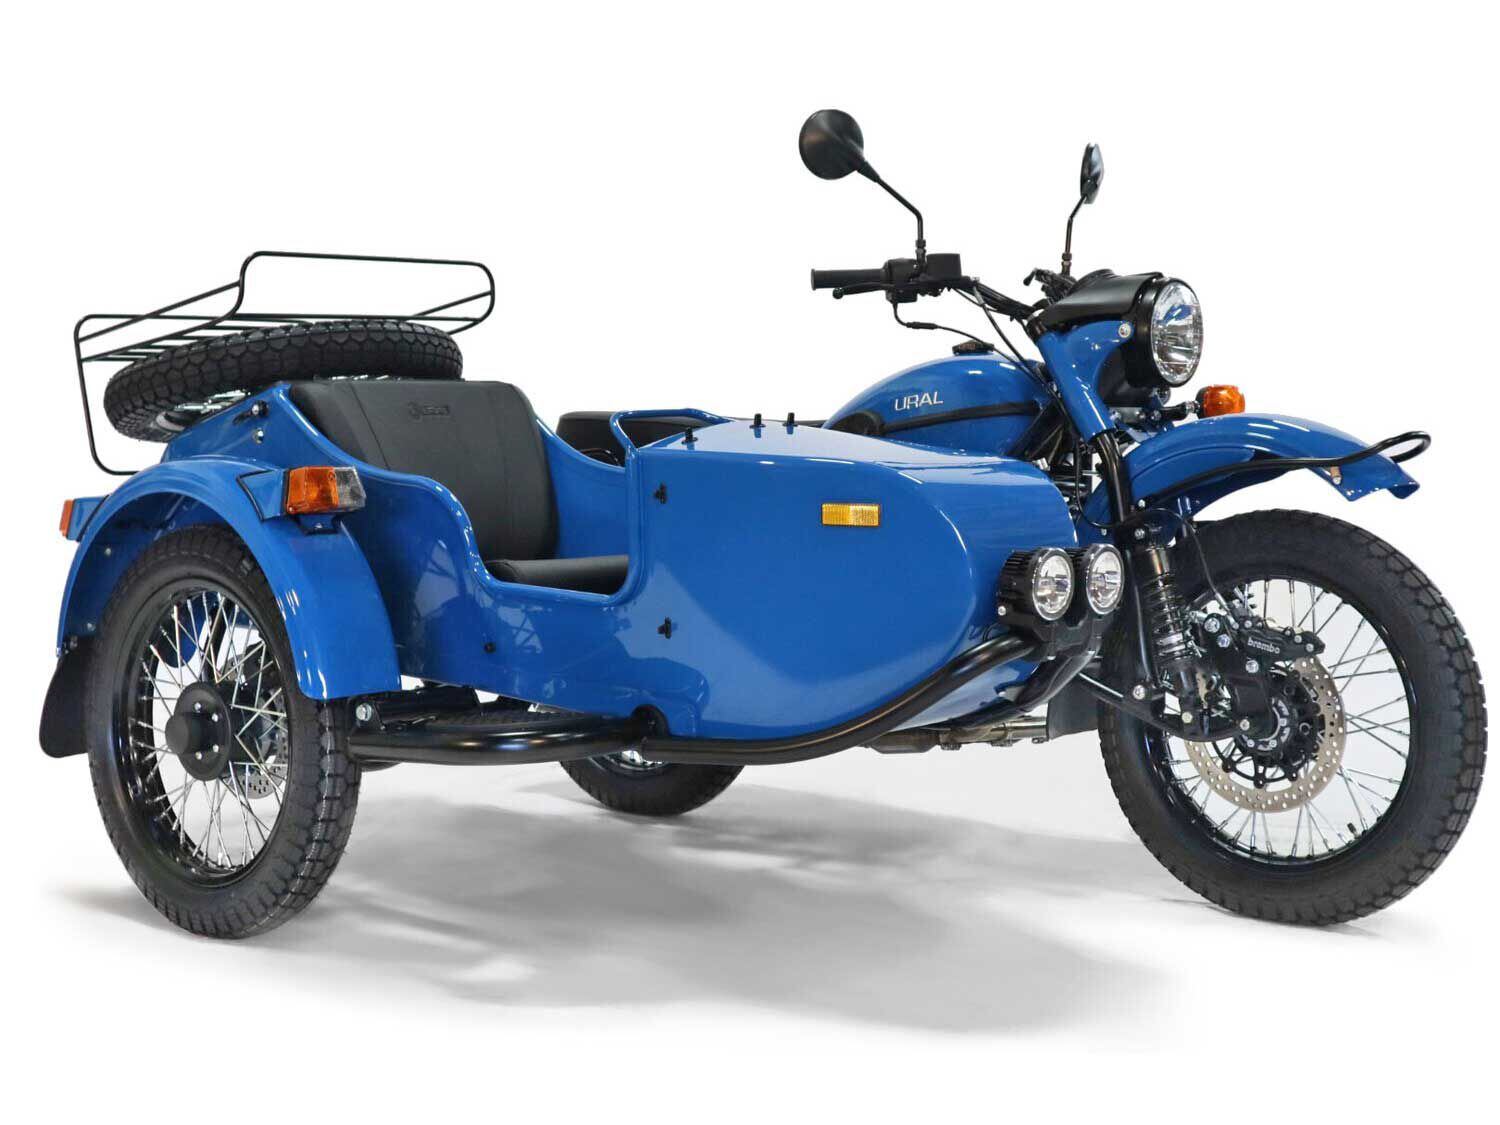 The Ural sidecar rigs offer a simple boxer engine design, passenger accommodations, and the accessibility of three wheels.